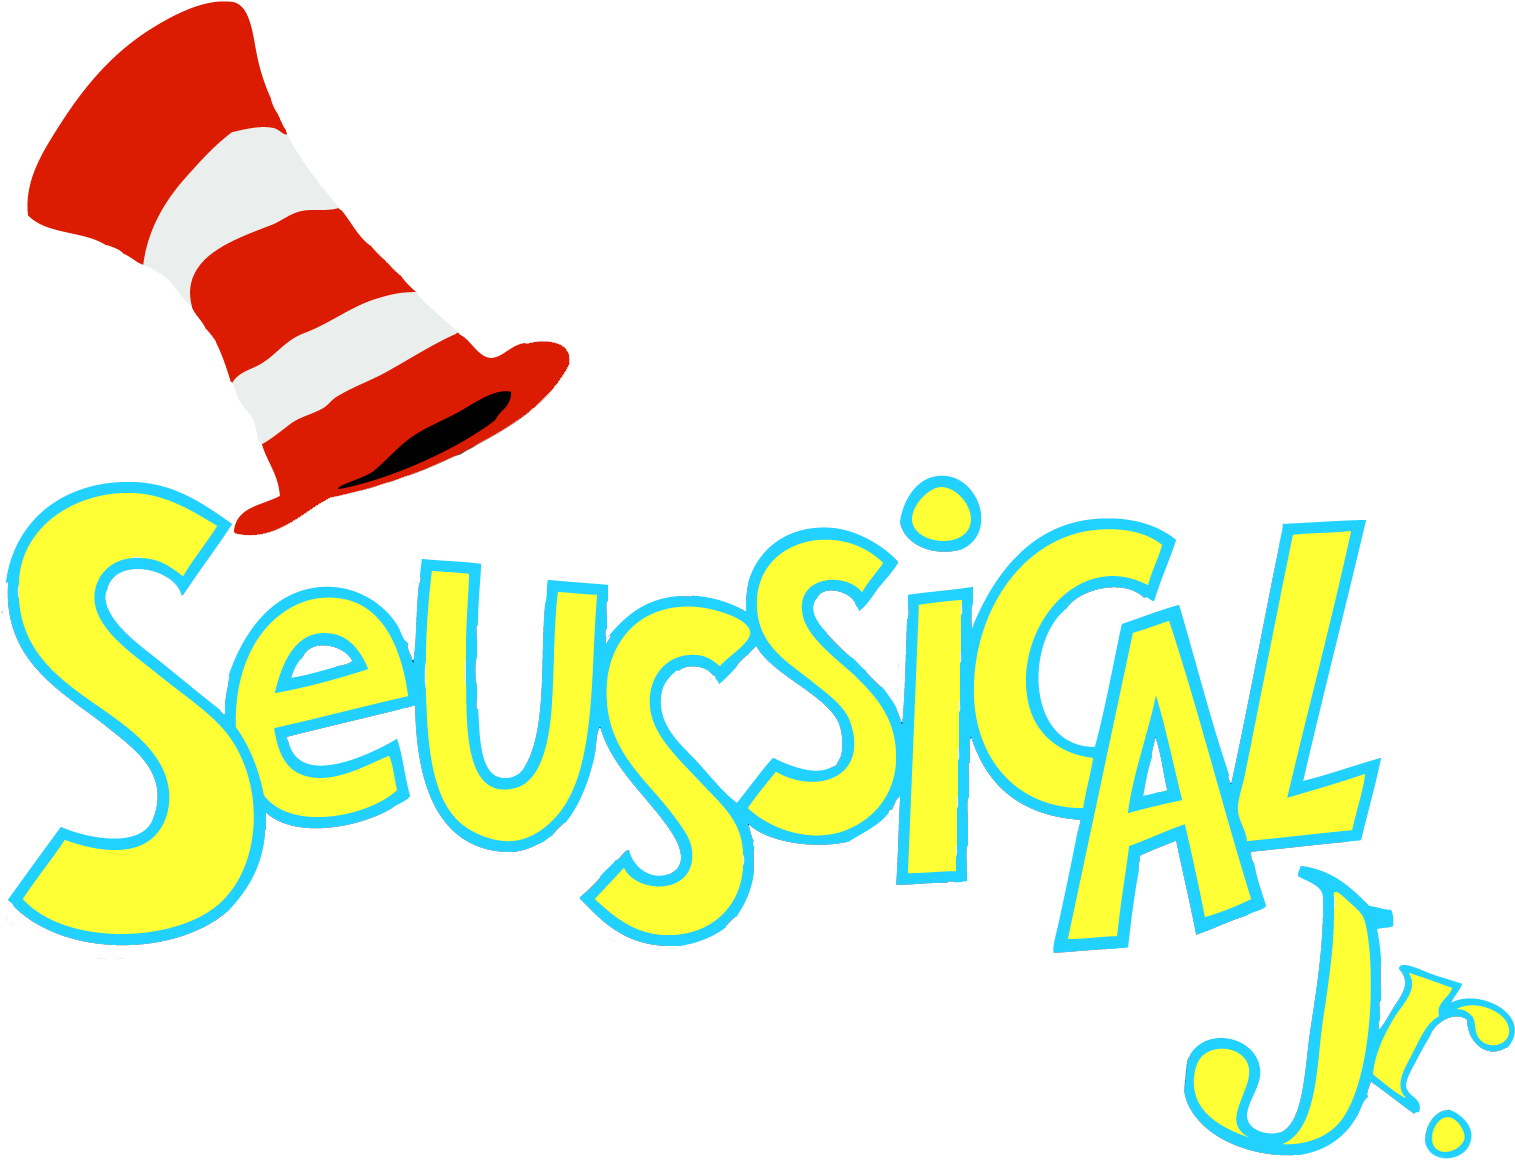 Saturday, July 29, - Seussical The Musical Logo (1537x1182)